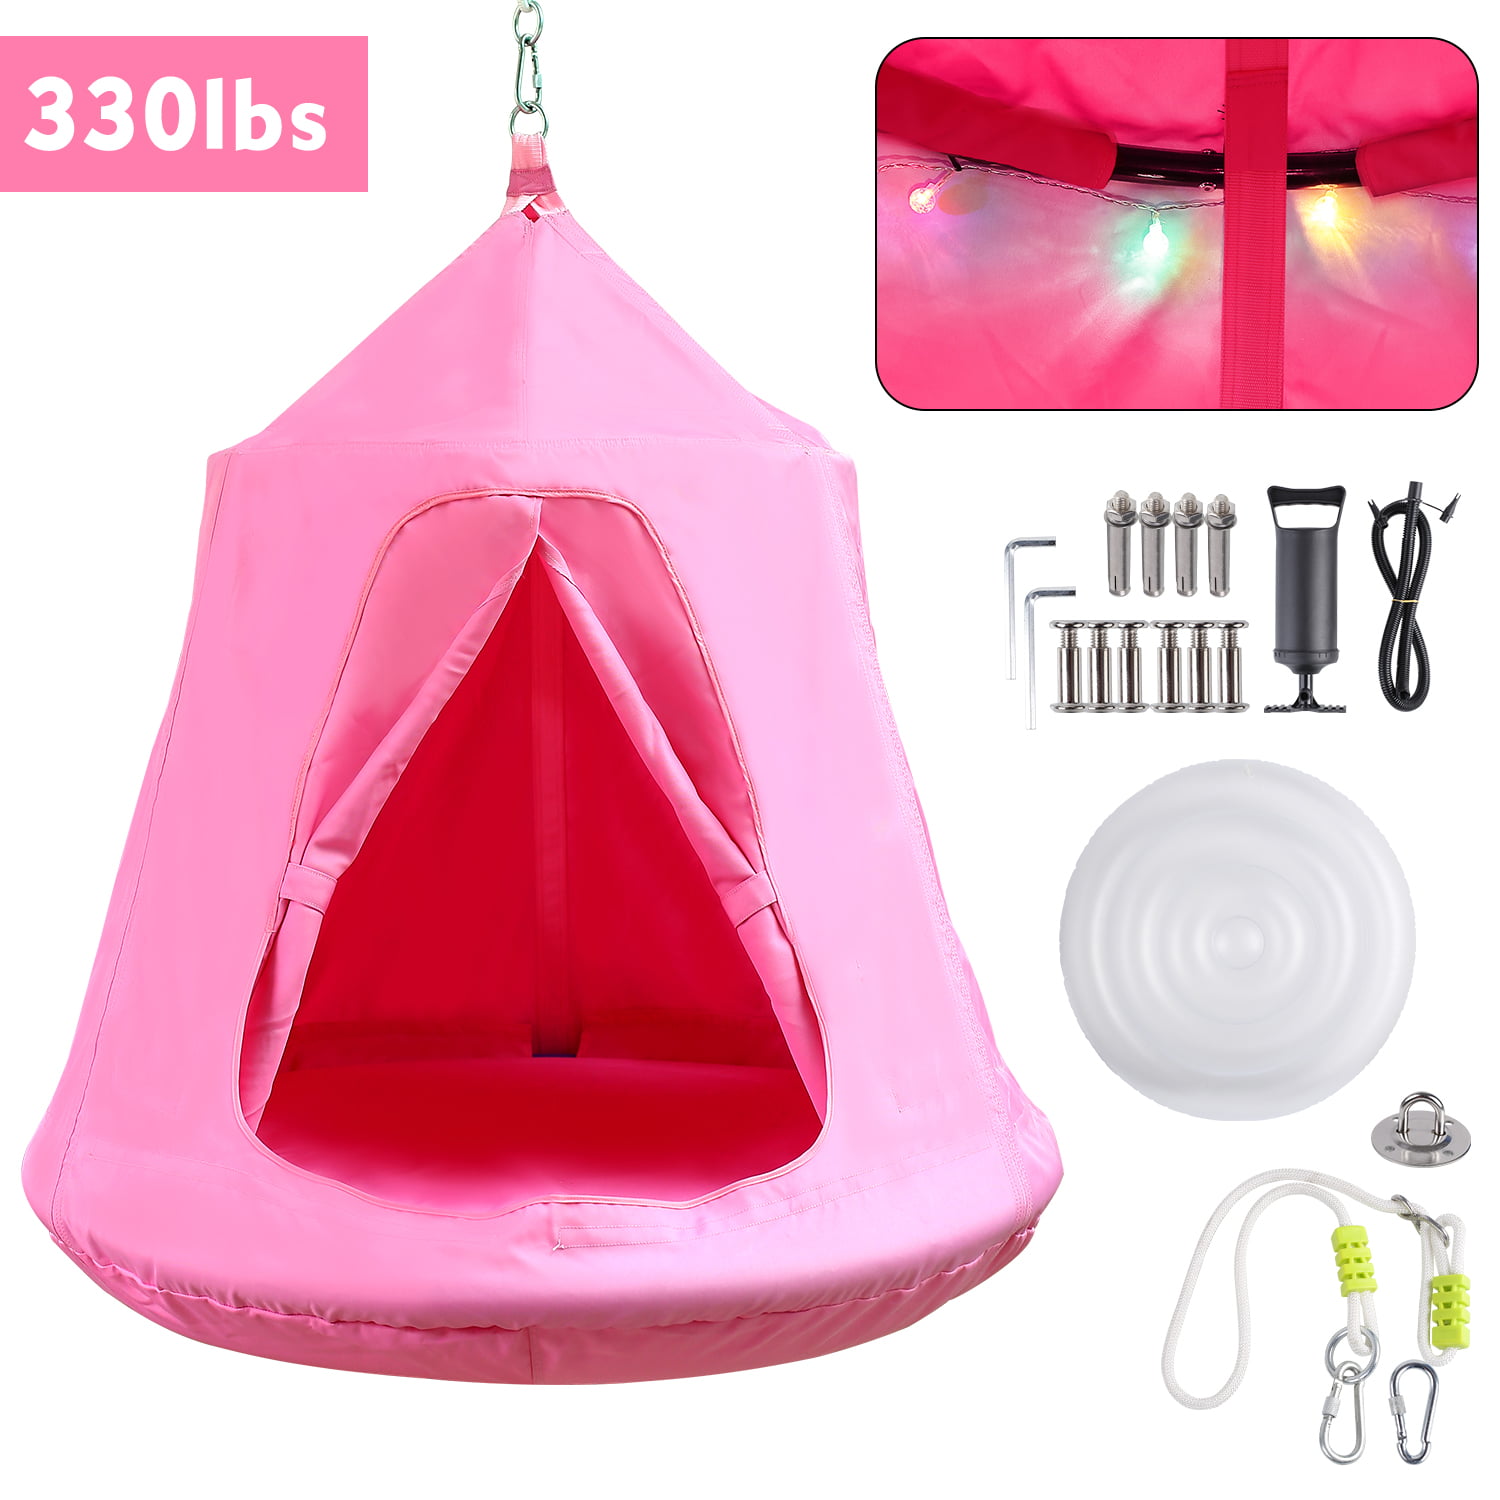 Hanging Tree Tent Pink Waterproof Portable Family for Kids Instant/Quick Setup 